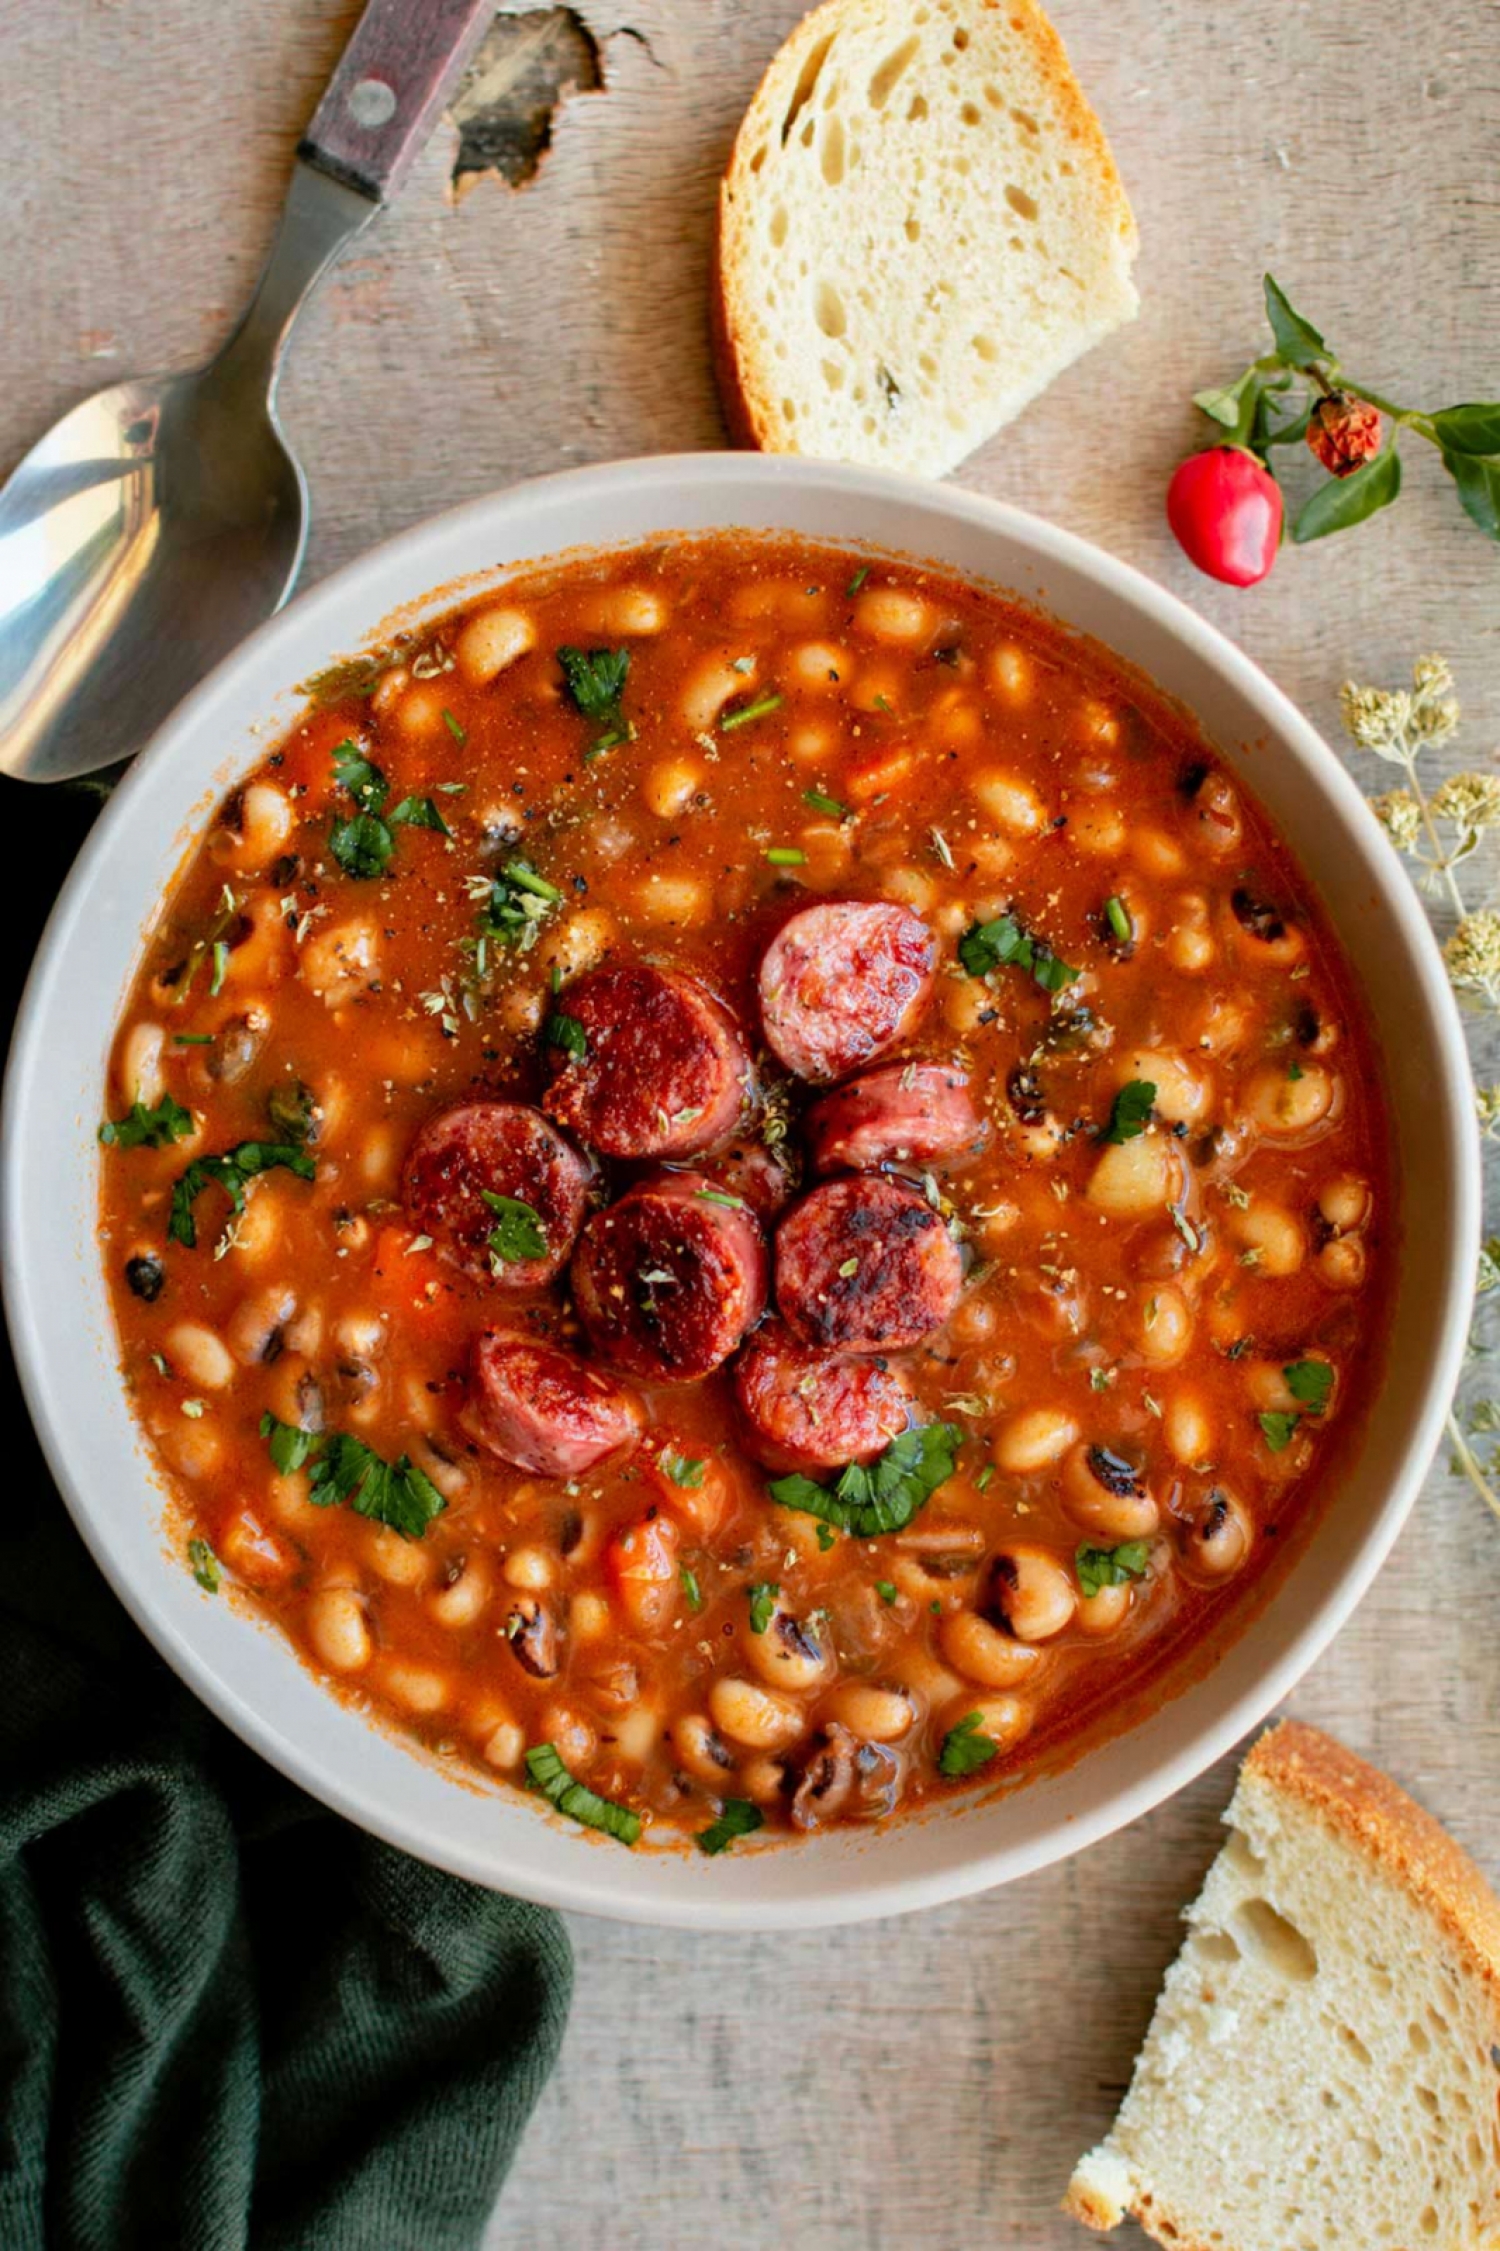 <p>Black-eyed peas and Greek sausage bulk up this gluten-free tomato-y soup with a hint of spice and plenty of protein to keep you full for hours. If you can't find Greek sausage, Italian will do. <a href="https://www.realgreekrecipes.com/black-eyed-pea-soup/" rel="noopener">Get the recipe here.</a></p>